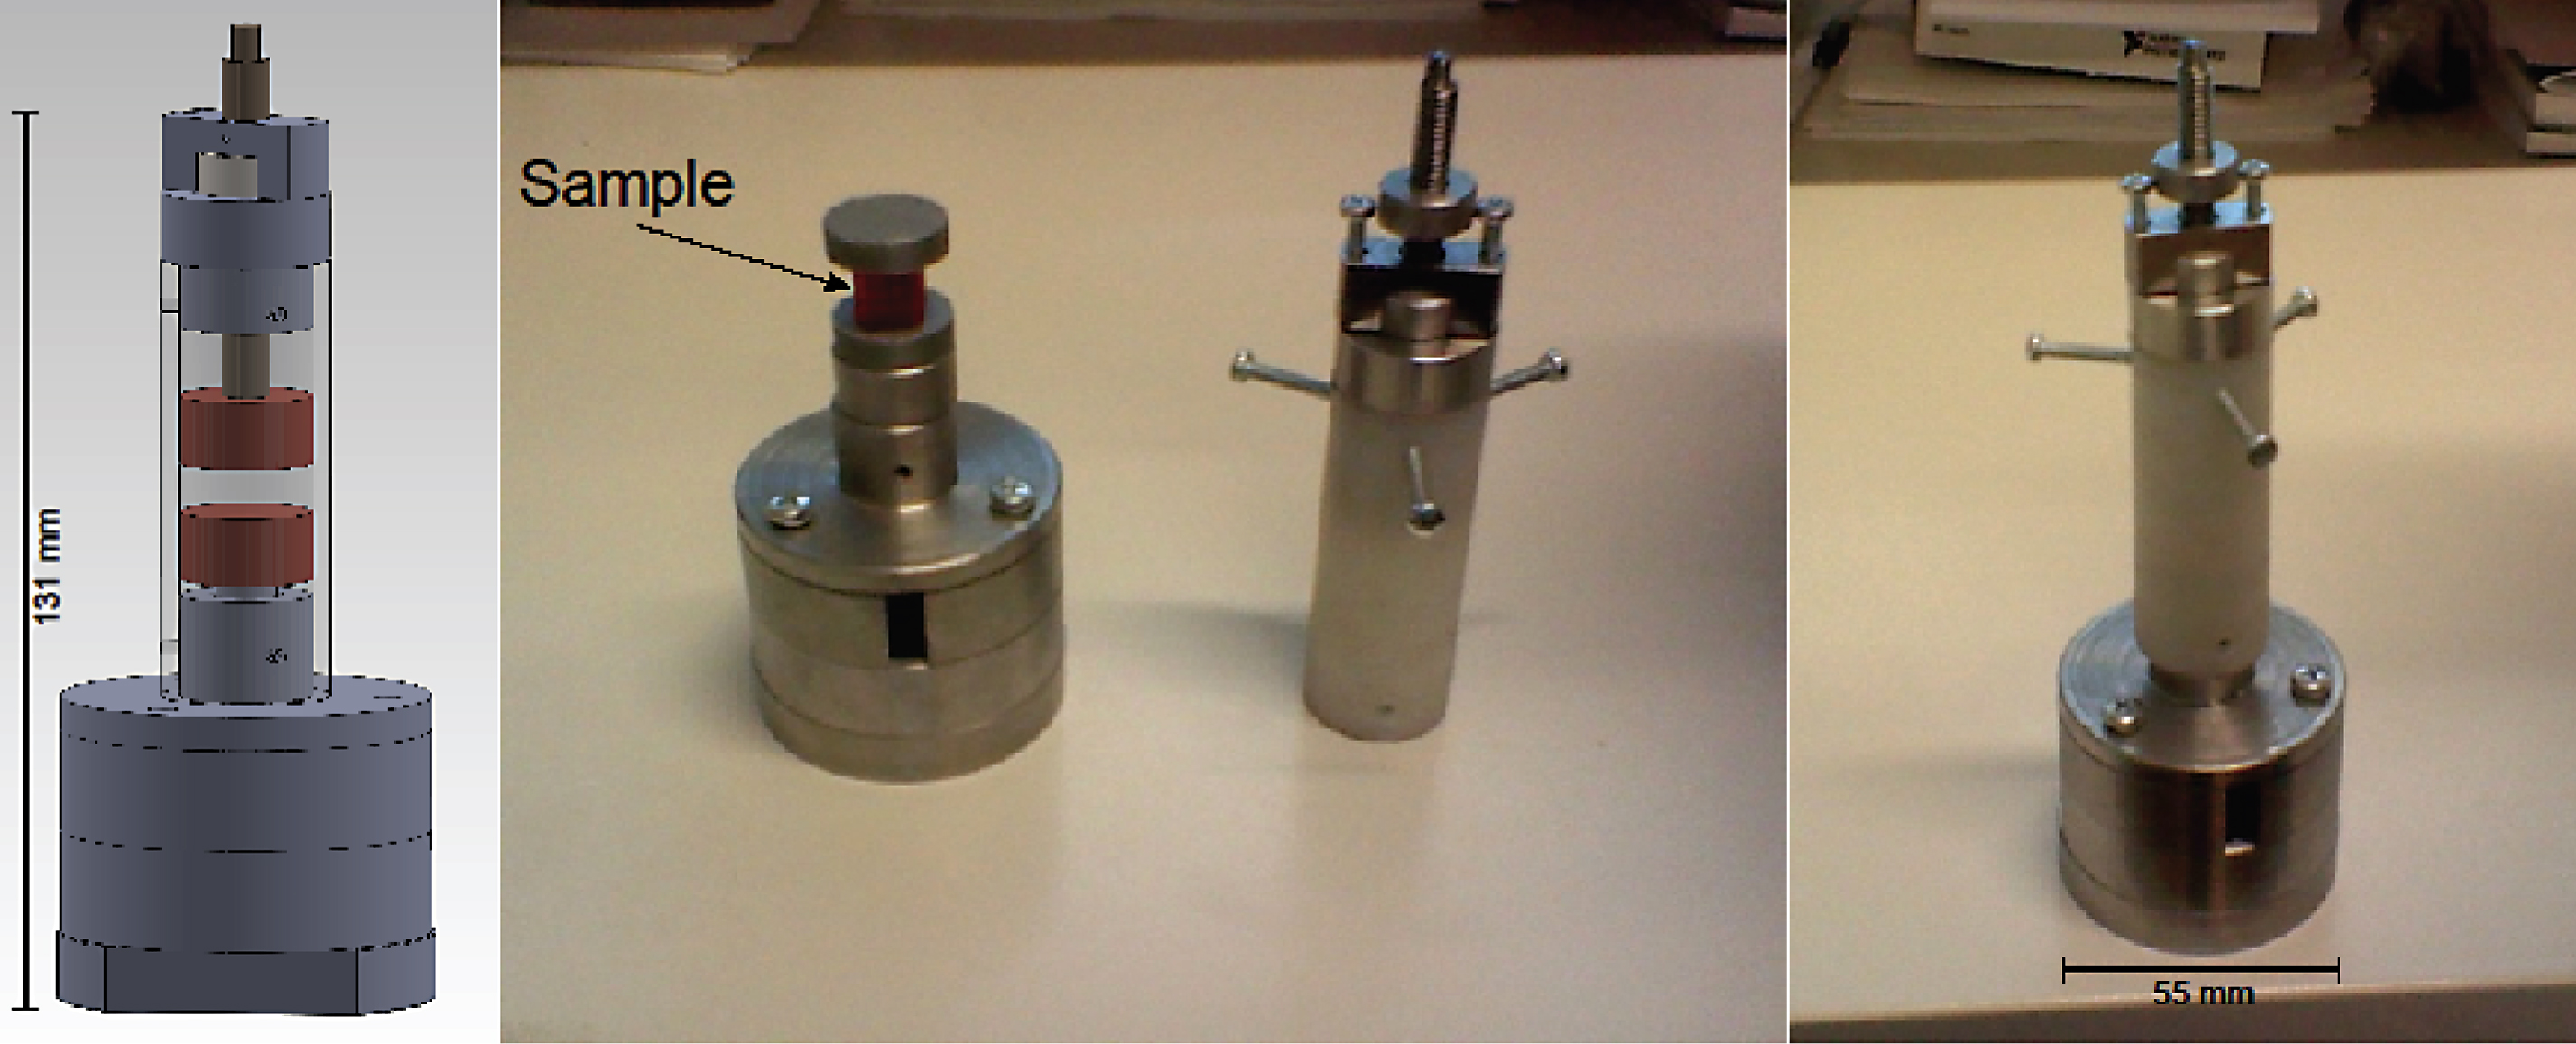 Mechanical deformation device and the sample setup within it. Drawing in the left pane shows the CAD assembly of the various components. The photographs show the fabricated device where – centre pane: location of a sample within the device, right pane: The assembled device ready to be placed in the μCT.